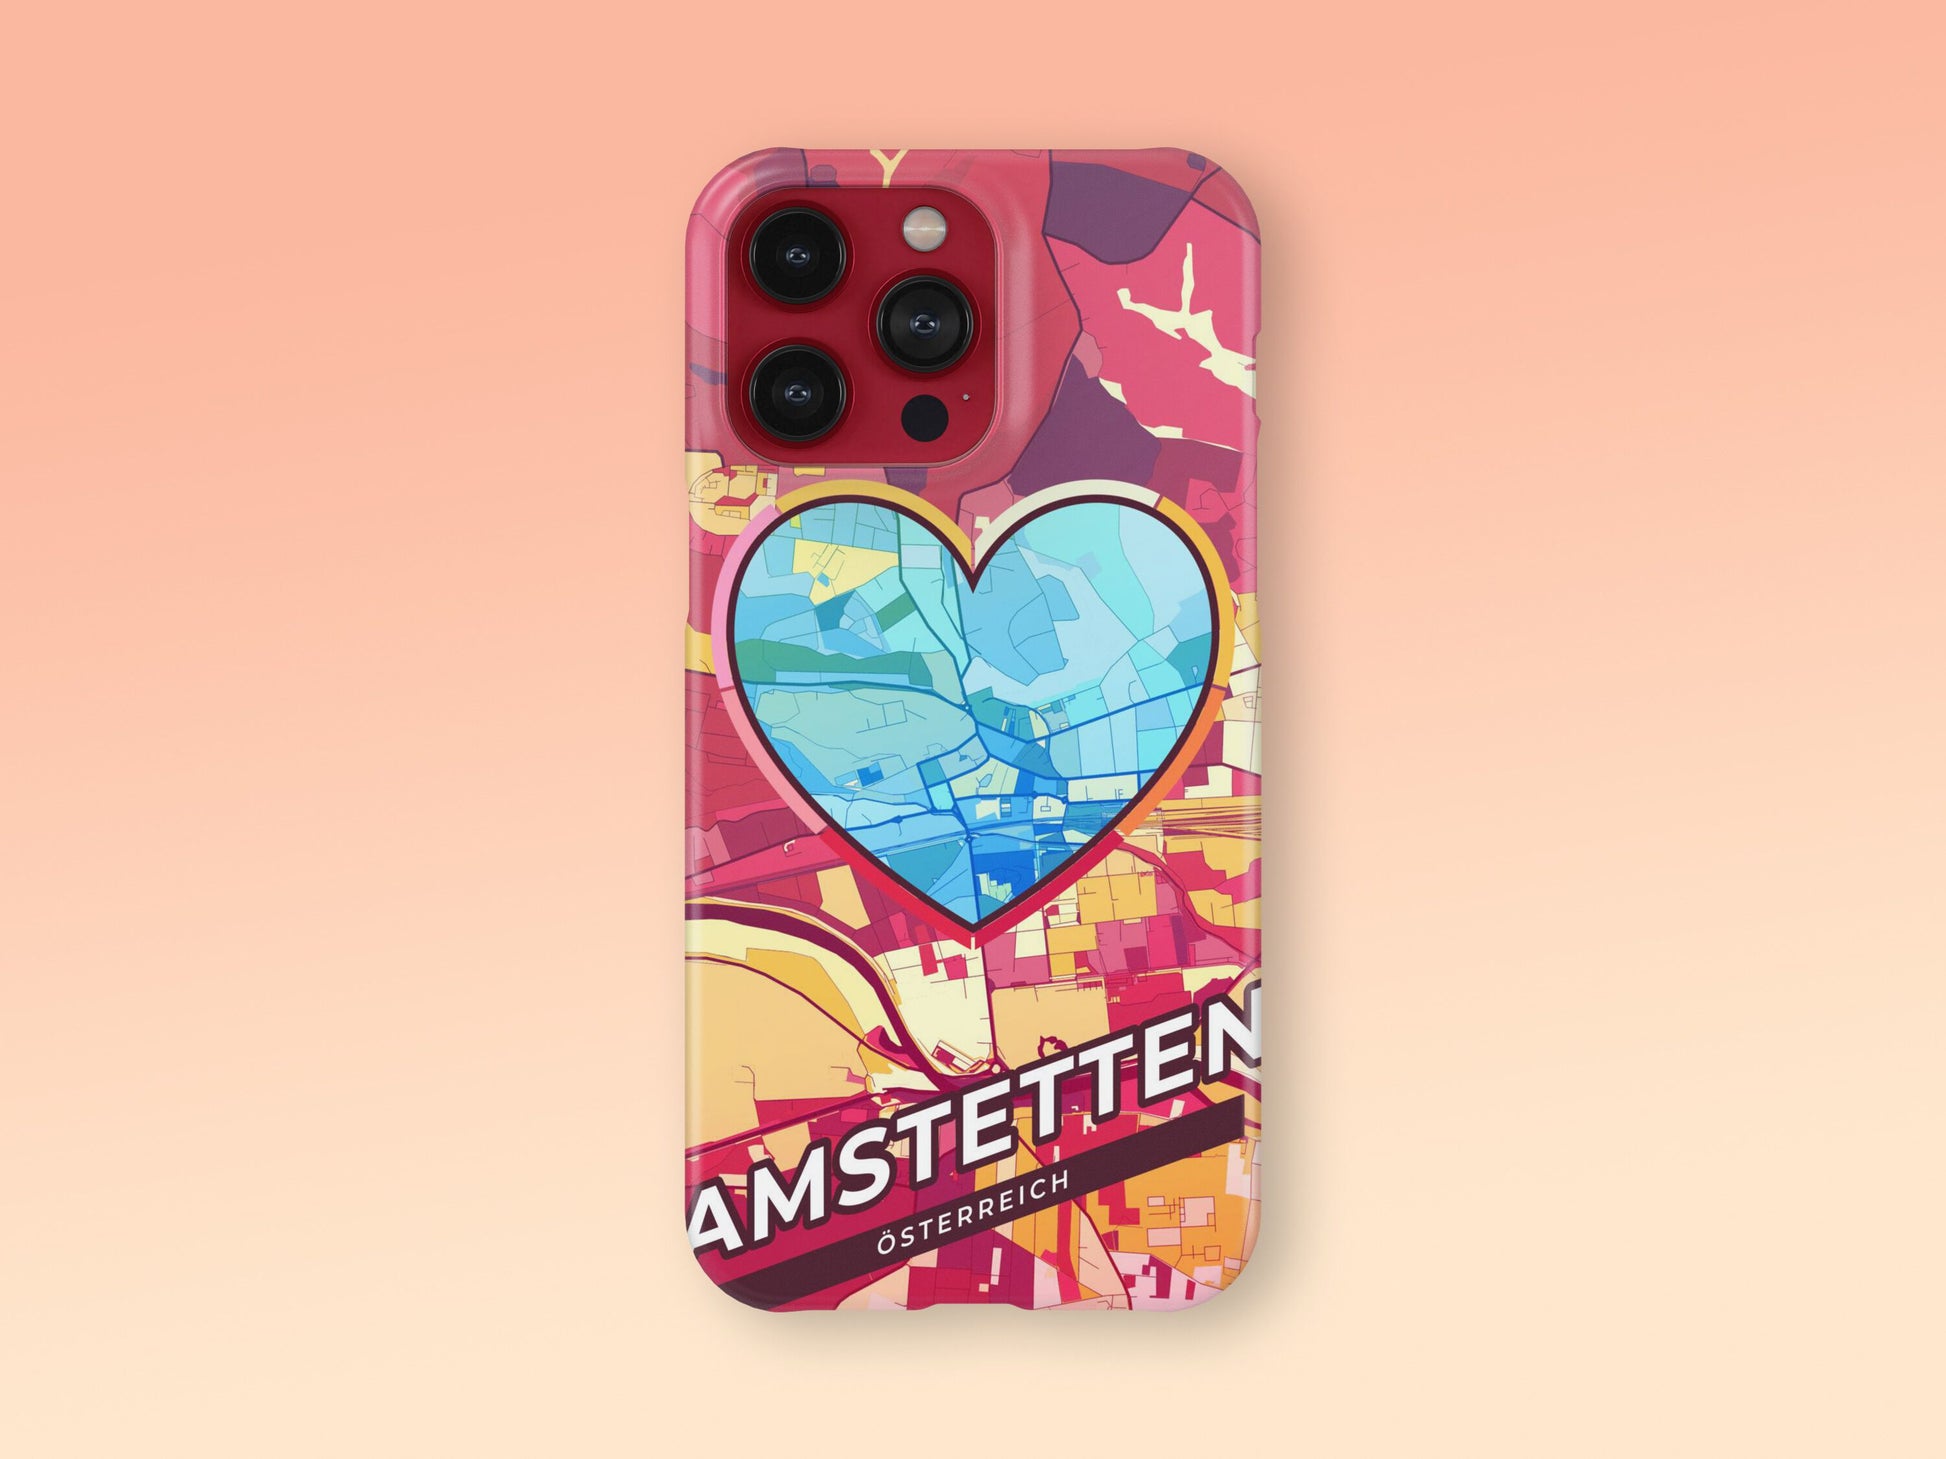 Amstetten Österreich slim phone case with colorful icon. Birthday, wedding or housewarming gift. Couple match cases. 2